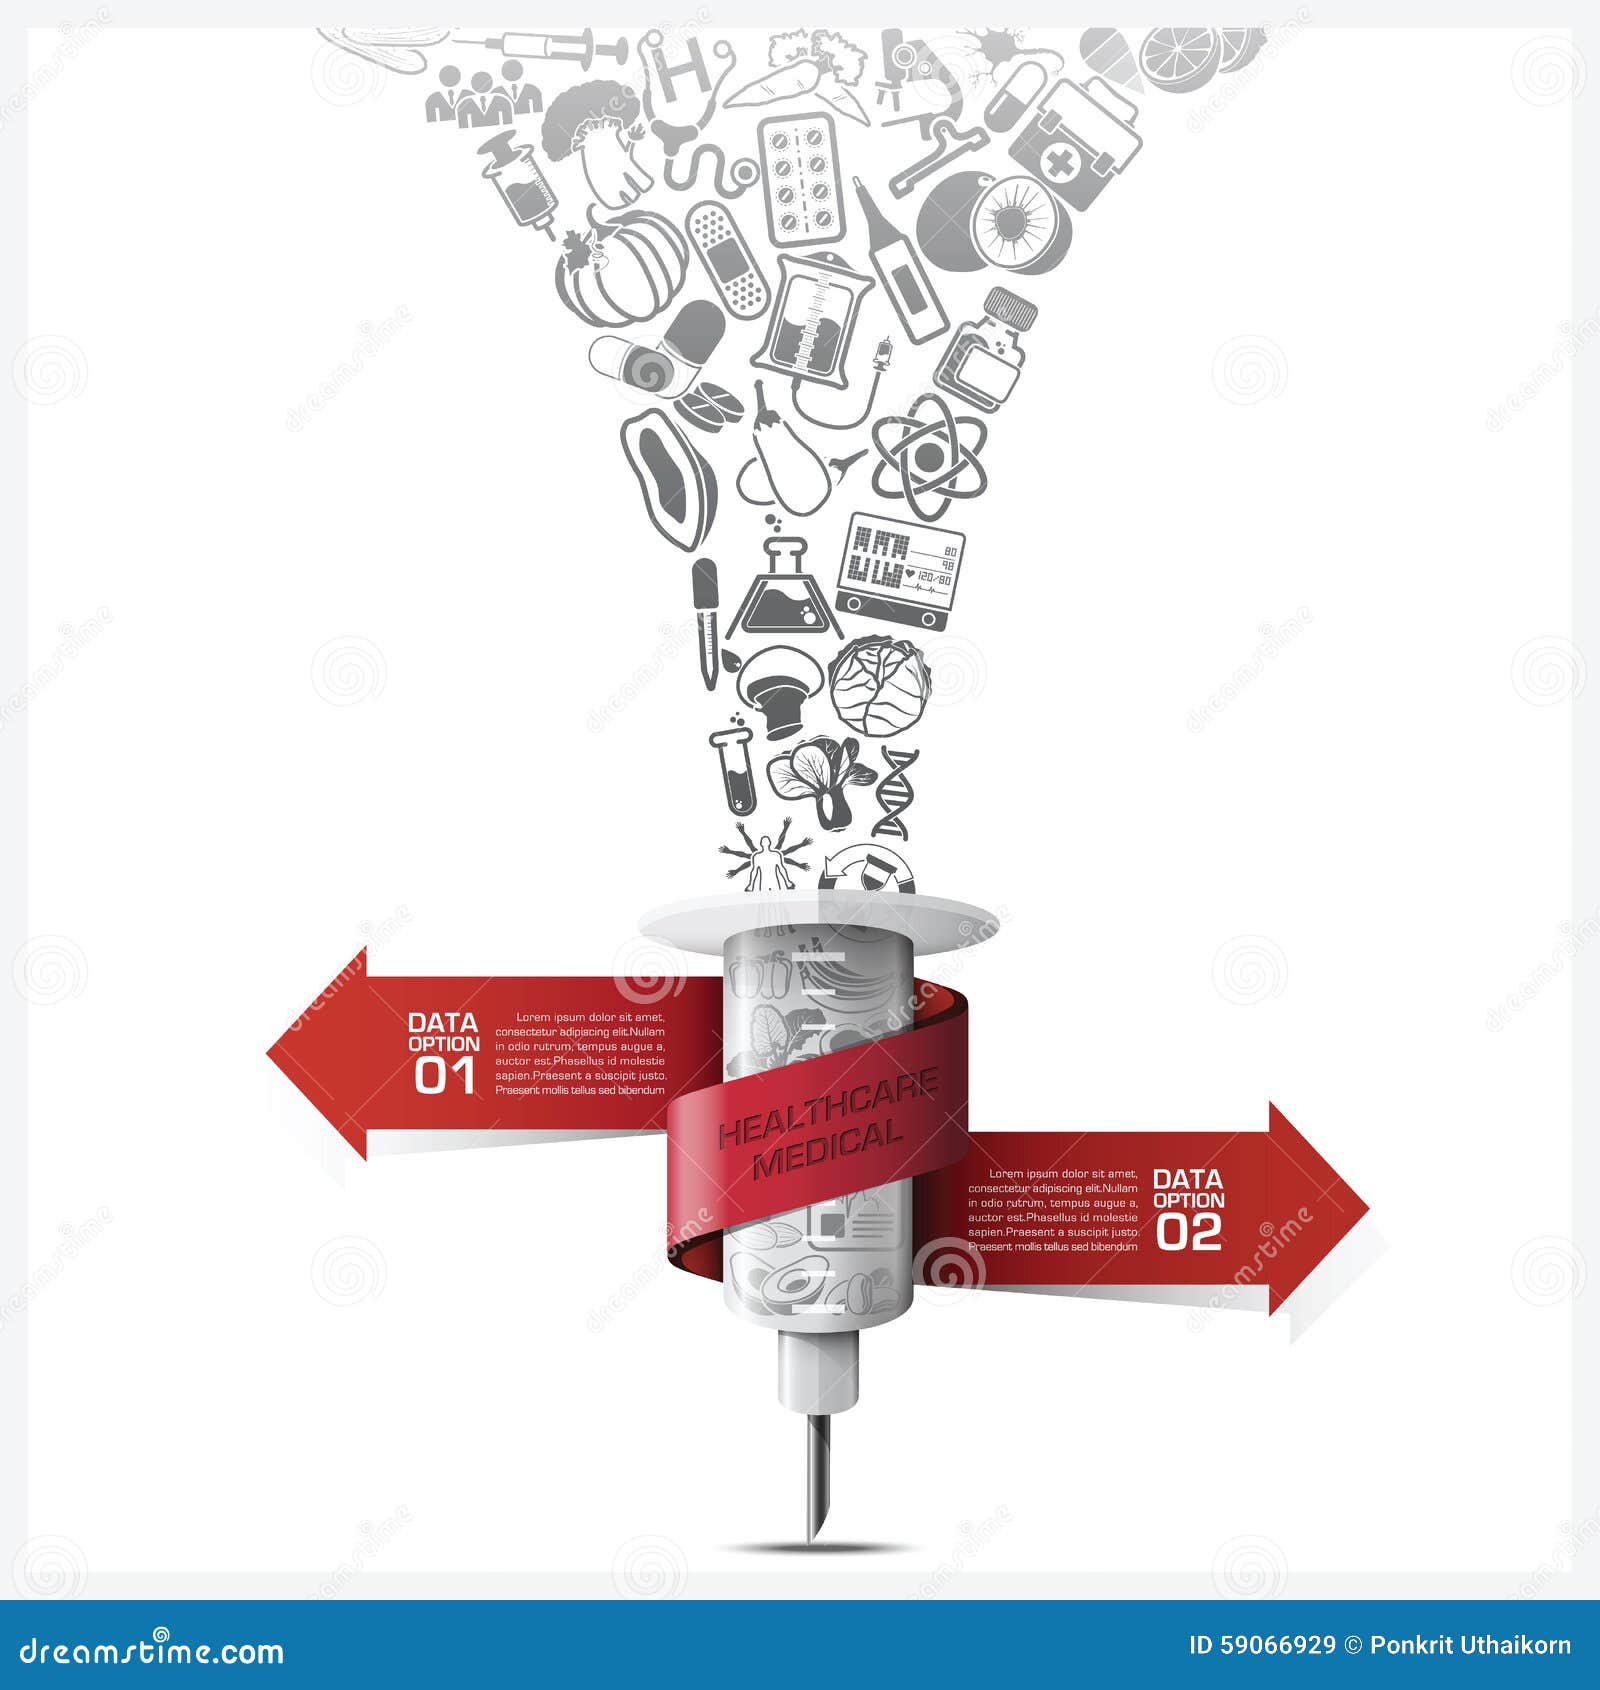 healthcare and medical infographic with bind spiral tag tree roo